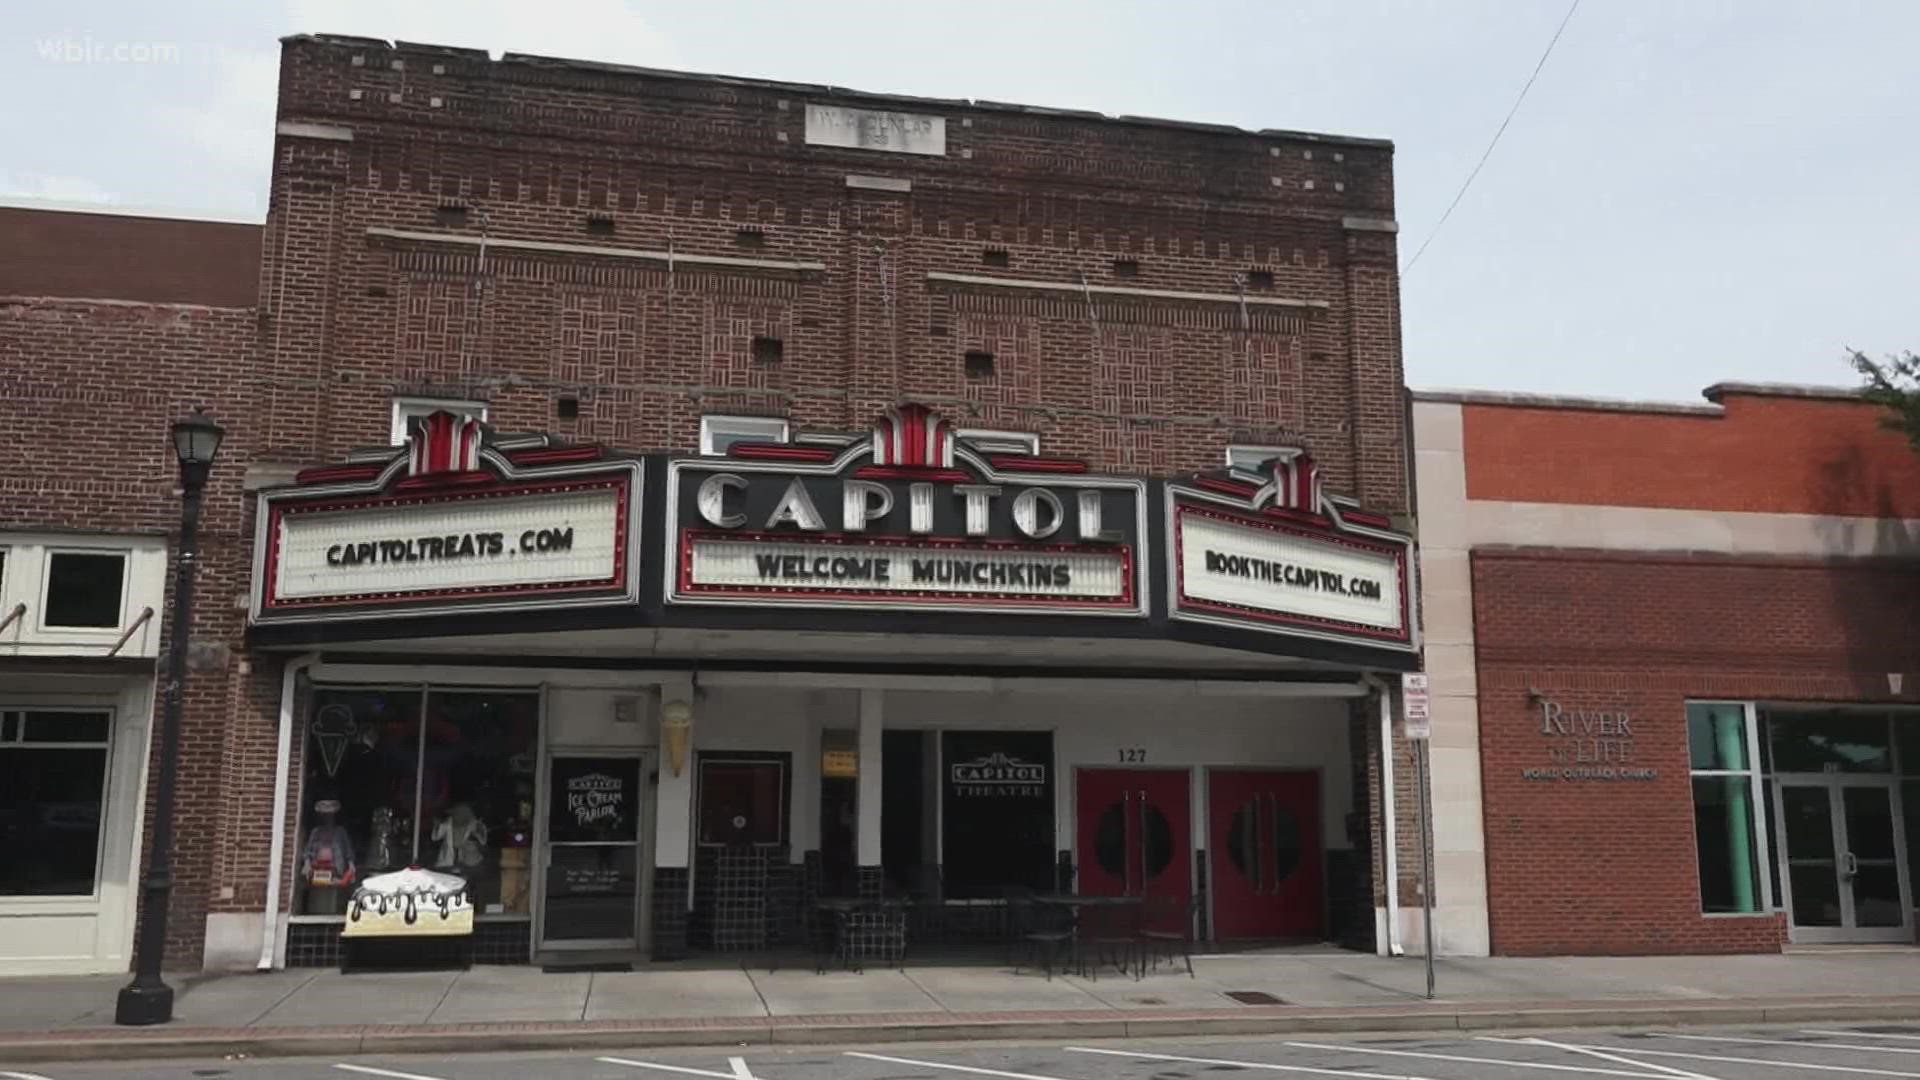 The Capitol Theatre was once a movie theater, but has since transitioned to a wedding and event venue with an ice cream and coffee shop attached to the side.